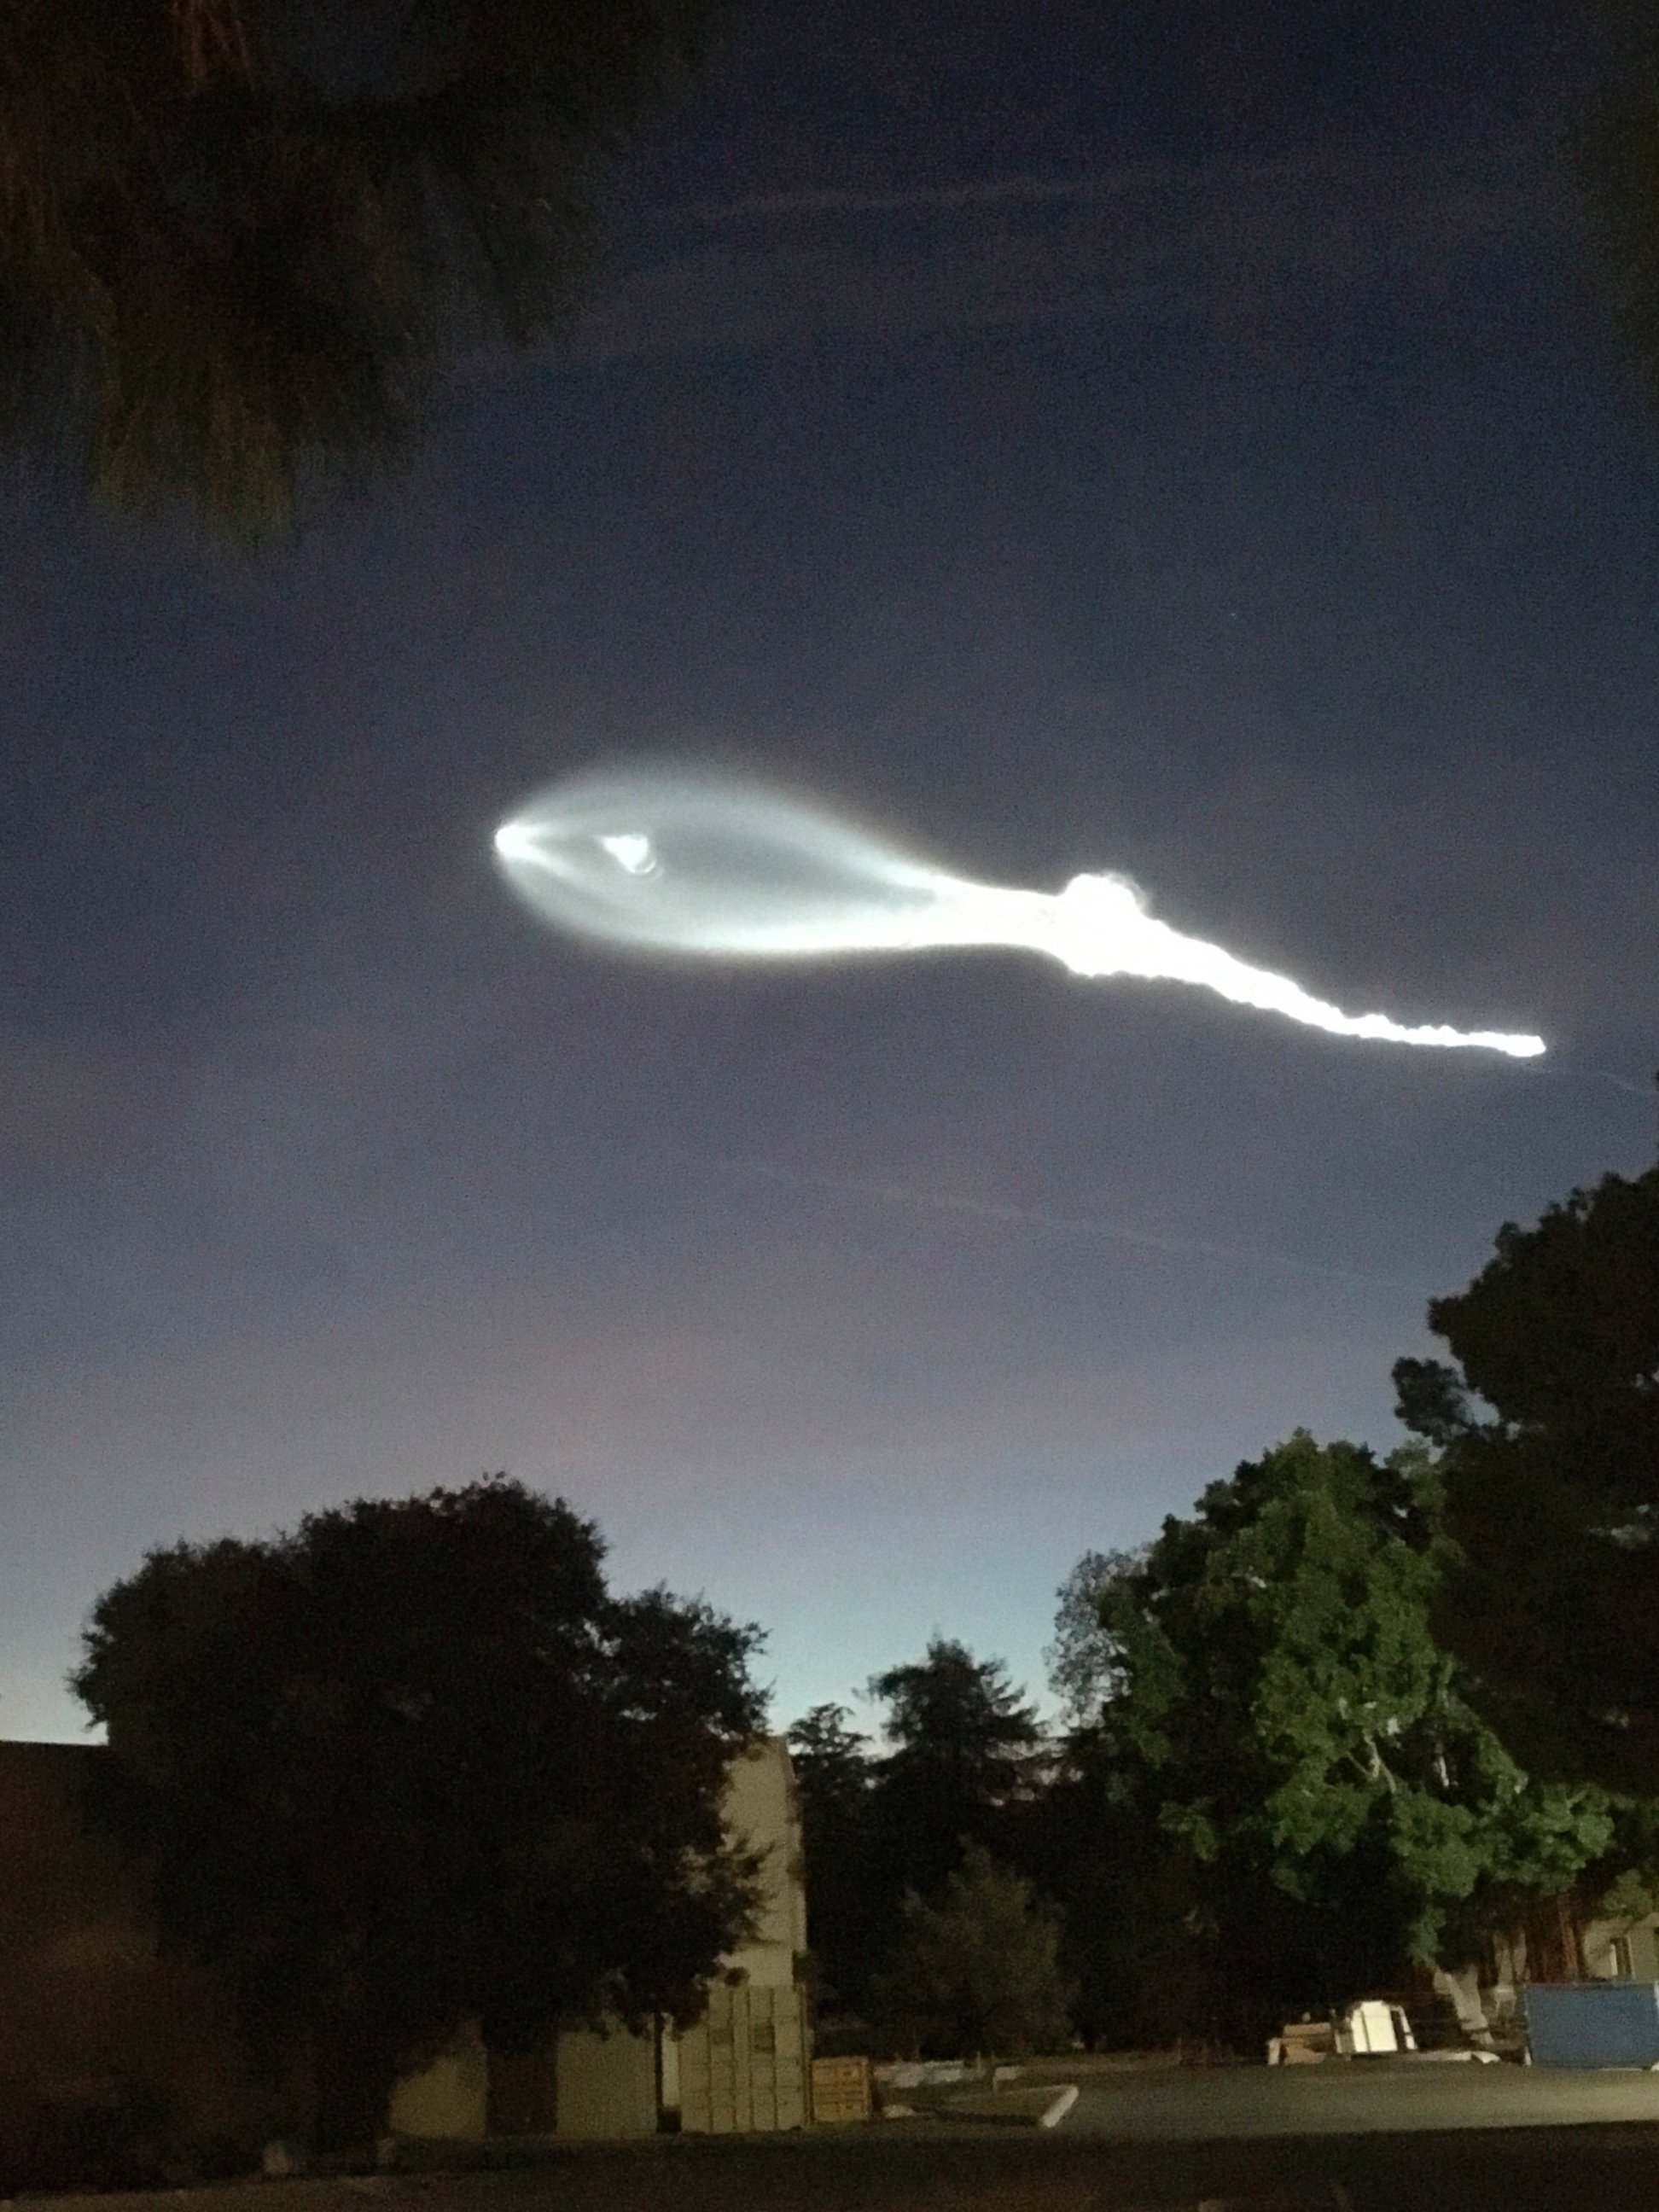 The contrail from a SpaceX Falcon 9 rocket is seen from Burbank, Calif., more than 100 miles southeast from its launch site in Vandenberg Air Force Base, Calif., on Friday, Dec. 22, 2017.